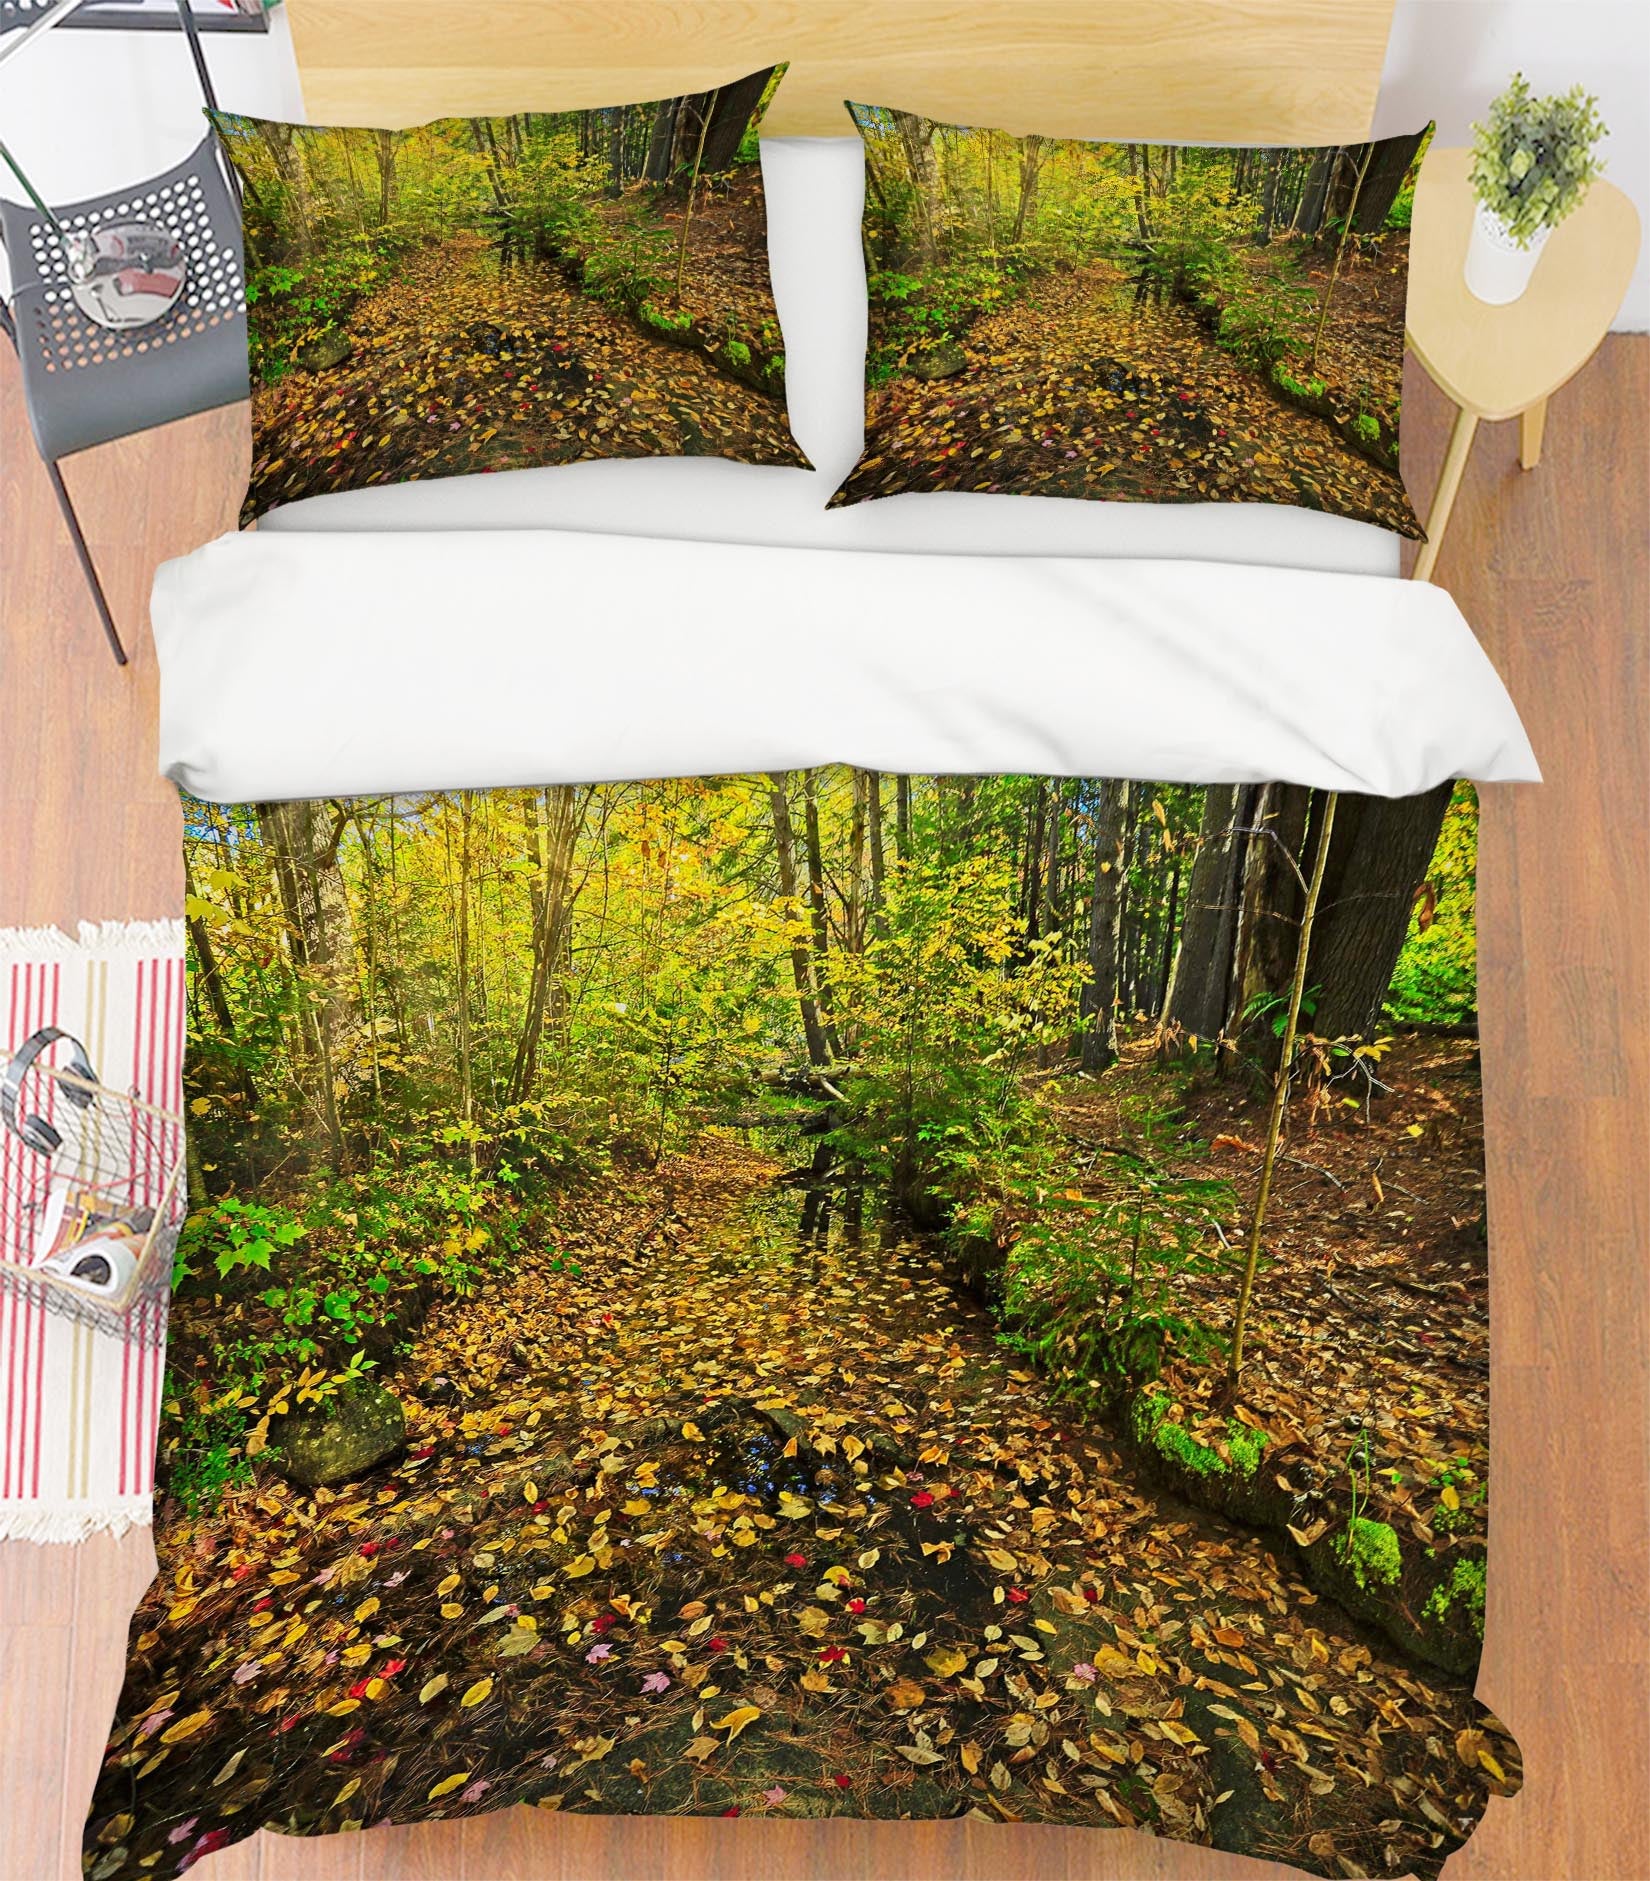 3D Leaf Creek 62187 Kathy Barefield Bedding Bed Pillowcases Quilt